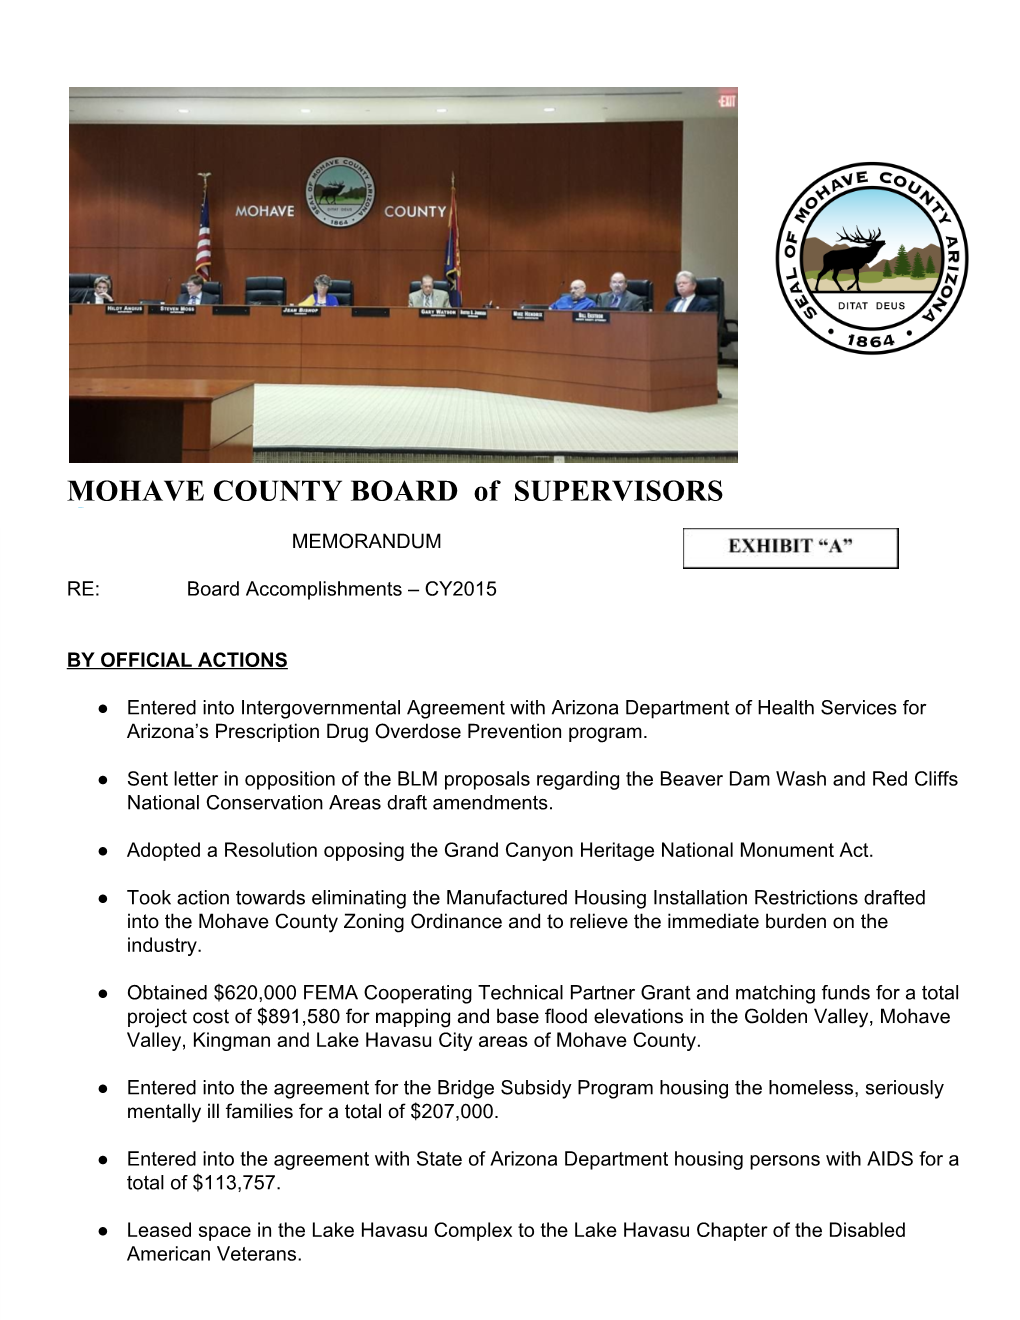 MOHAVE COUNTY BOARD of SUPERVISORS